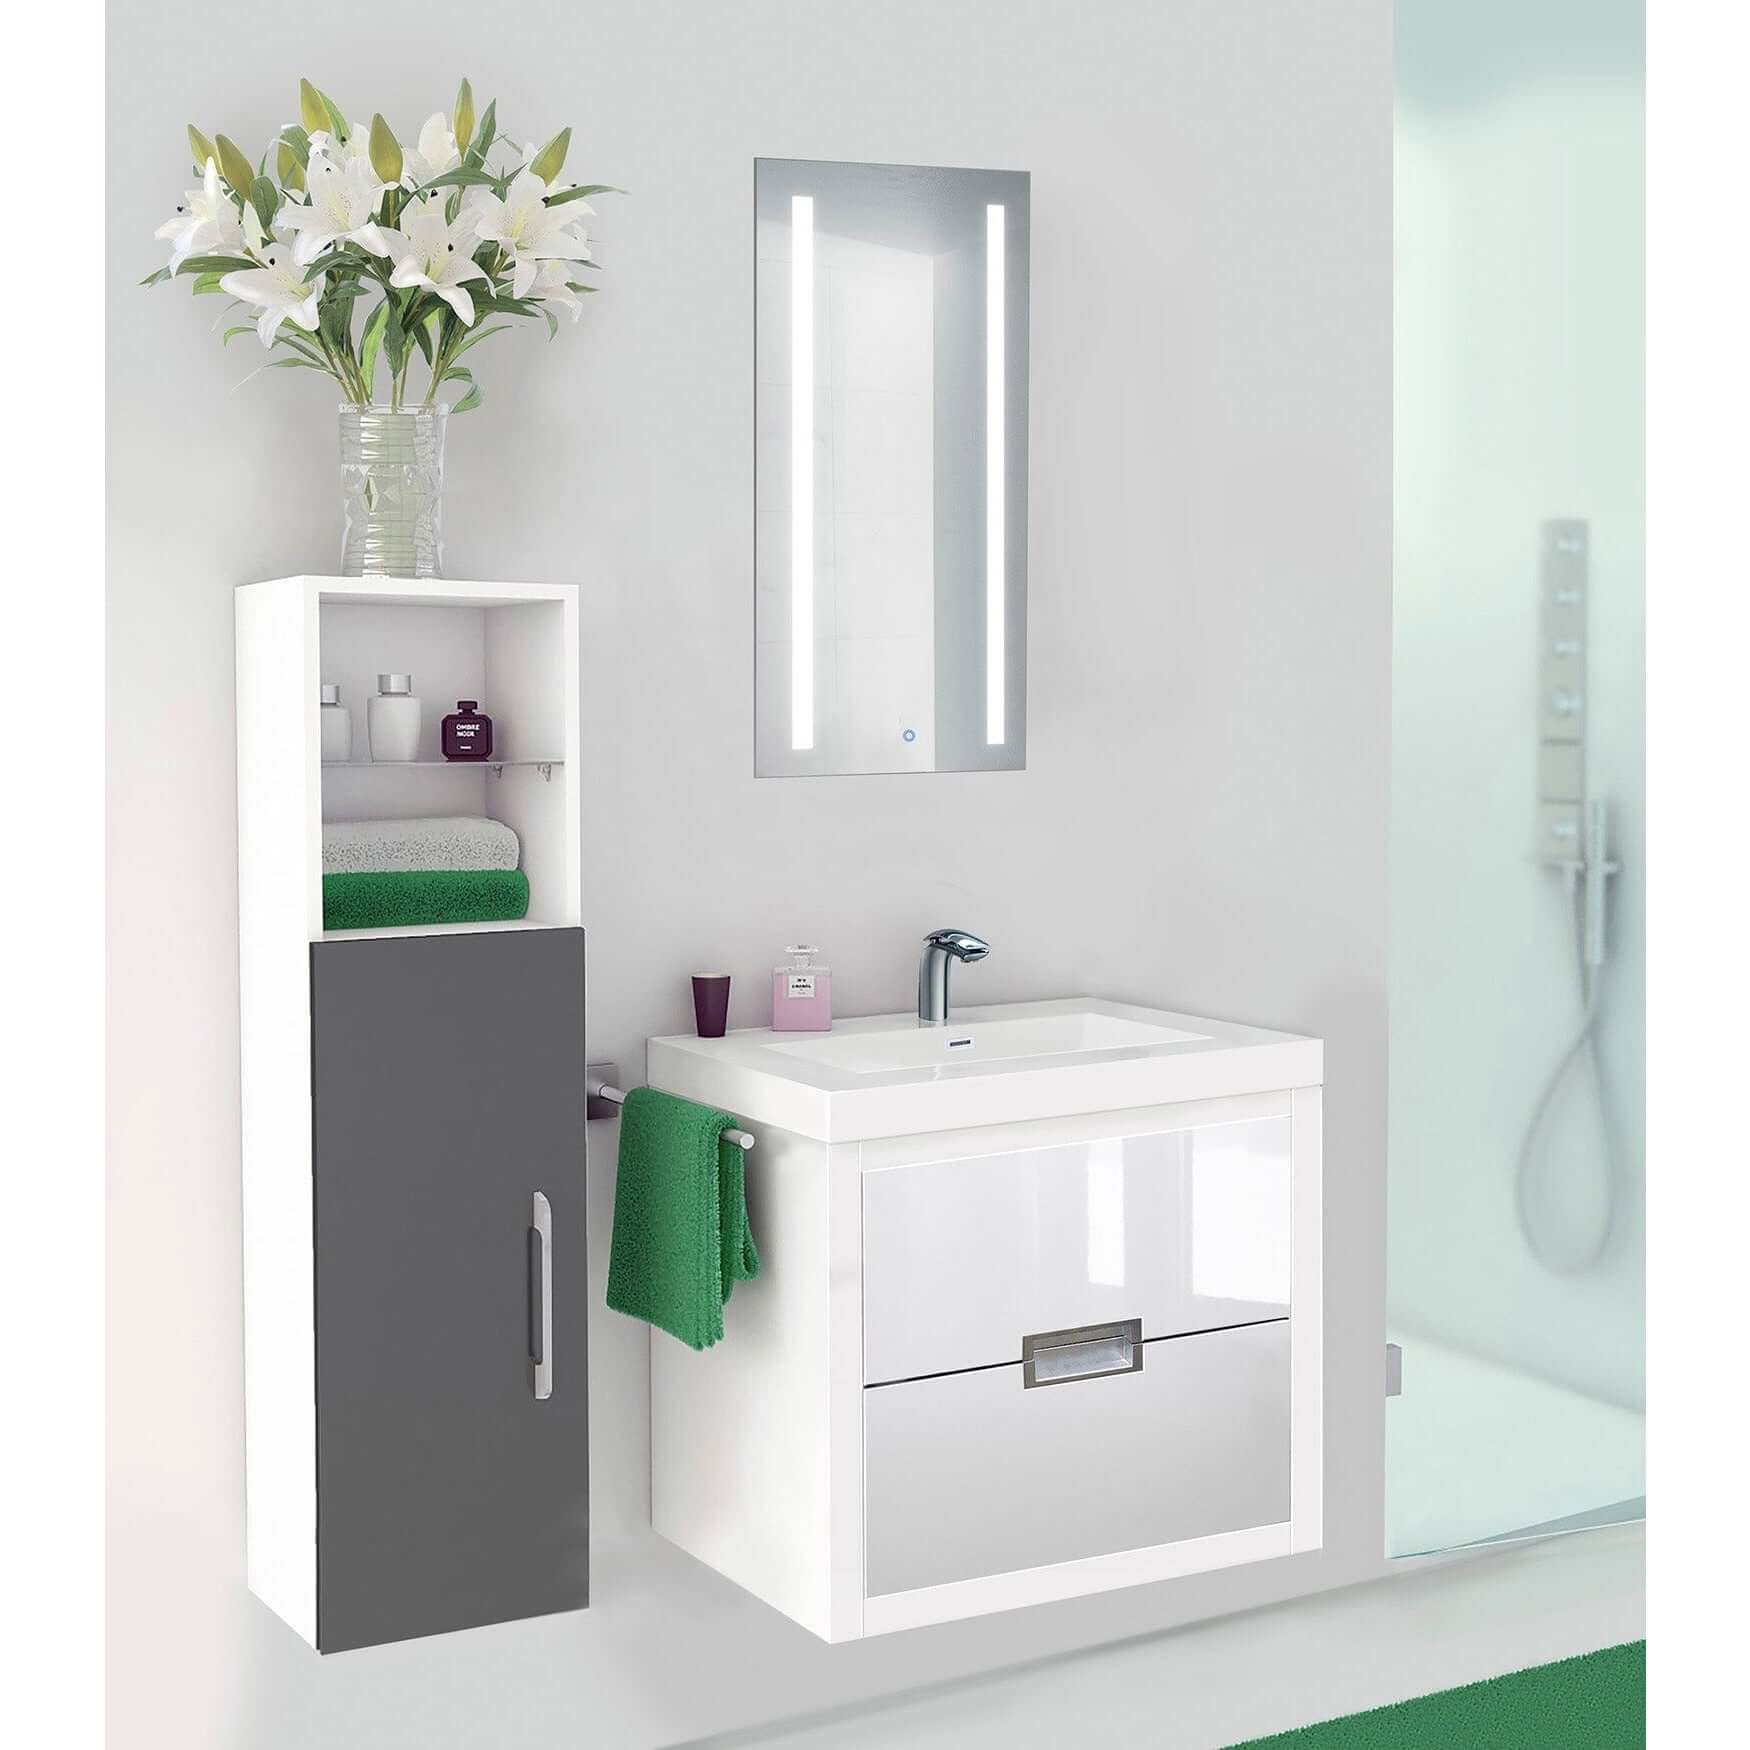 Bathroom interior highlighting the Kinetic medicine cabinet with green accents